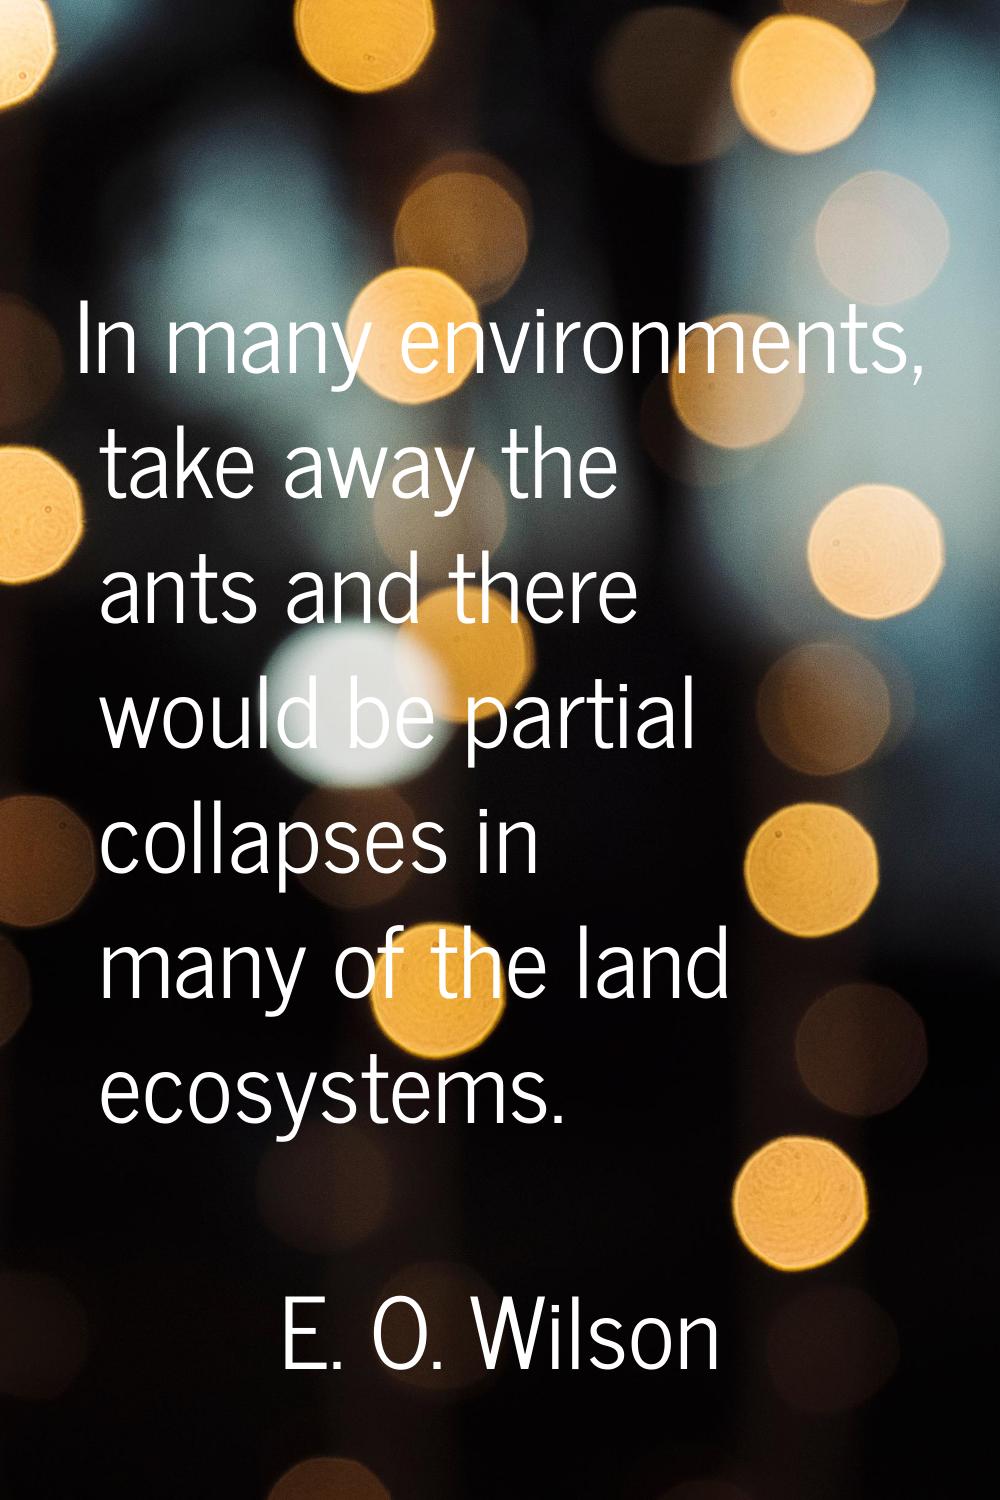 In many environments, take away the ants and there would be partial collapses in many of the land e